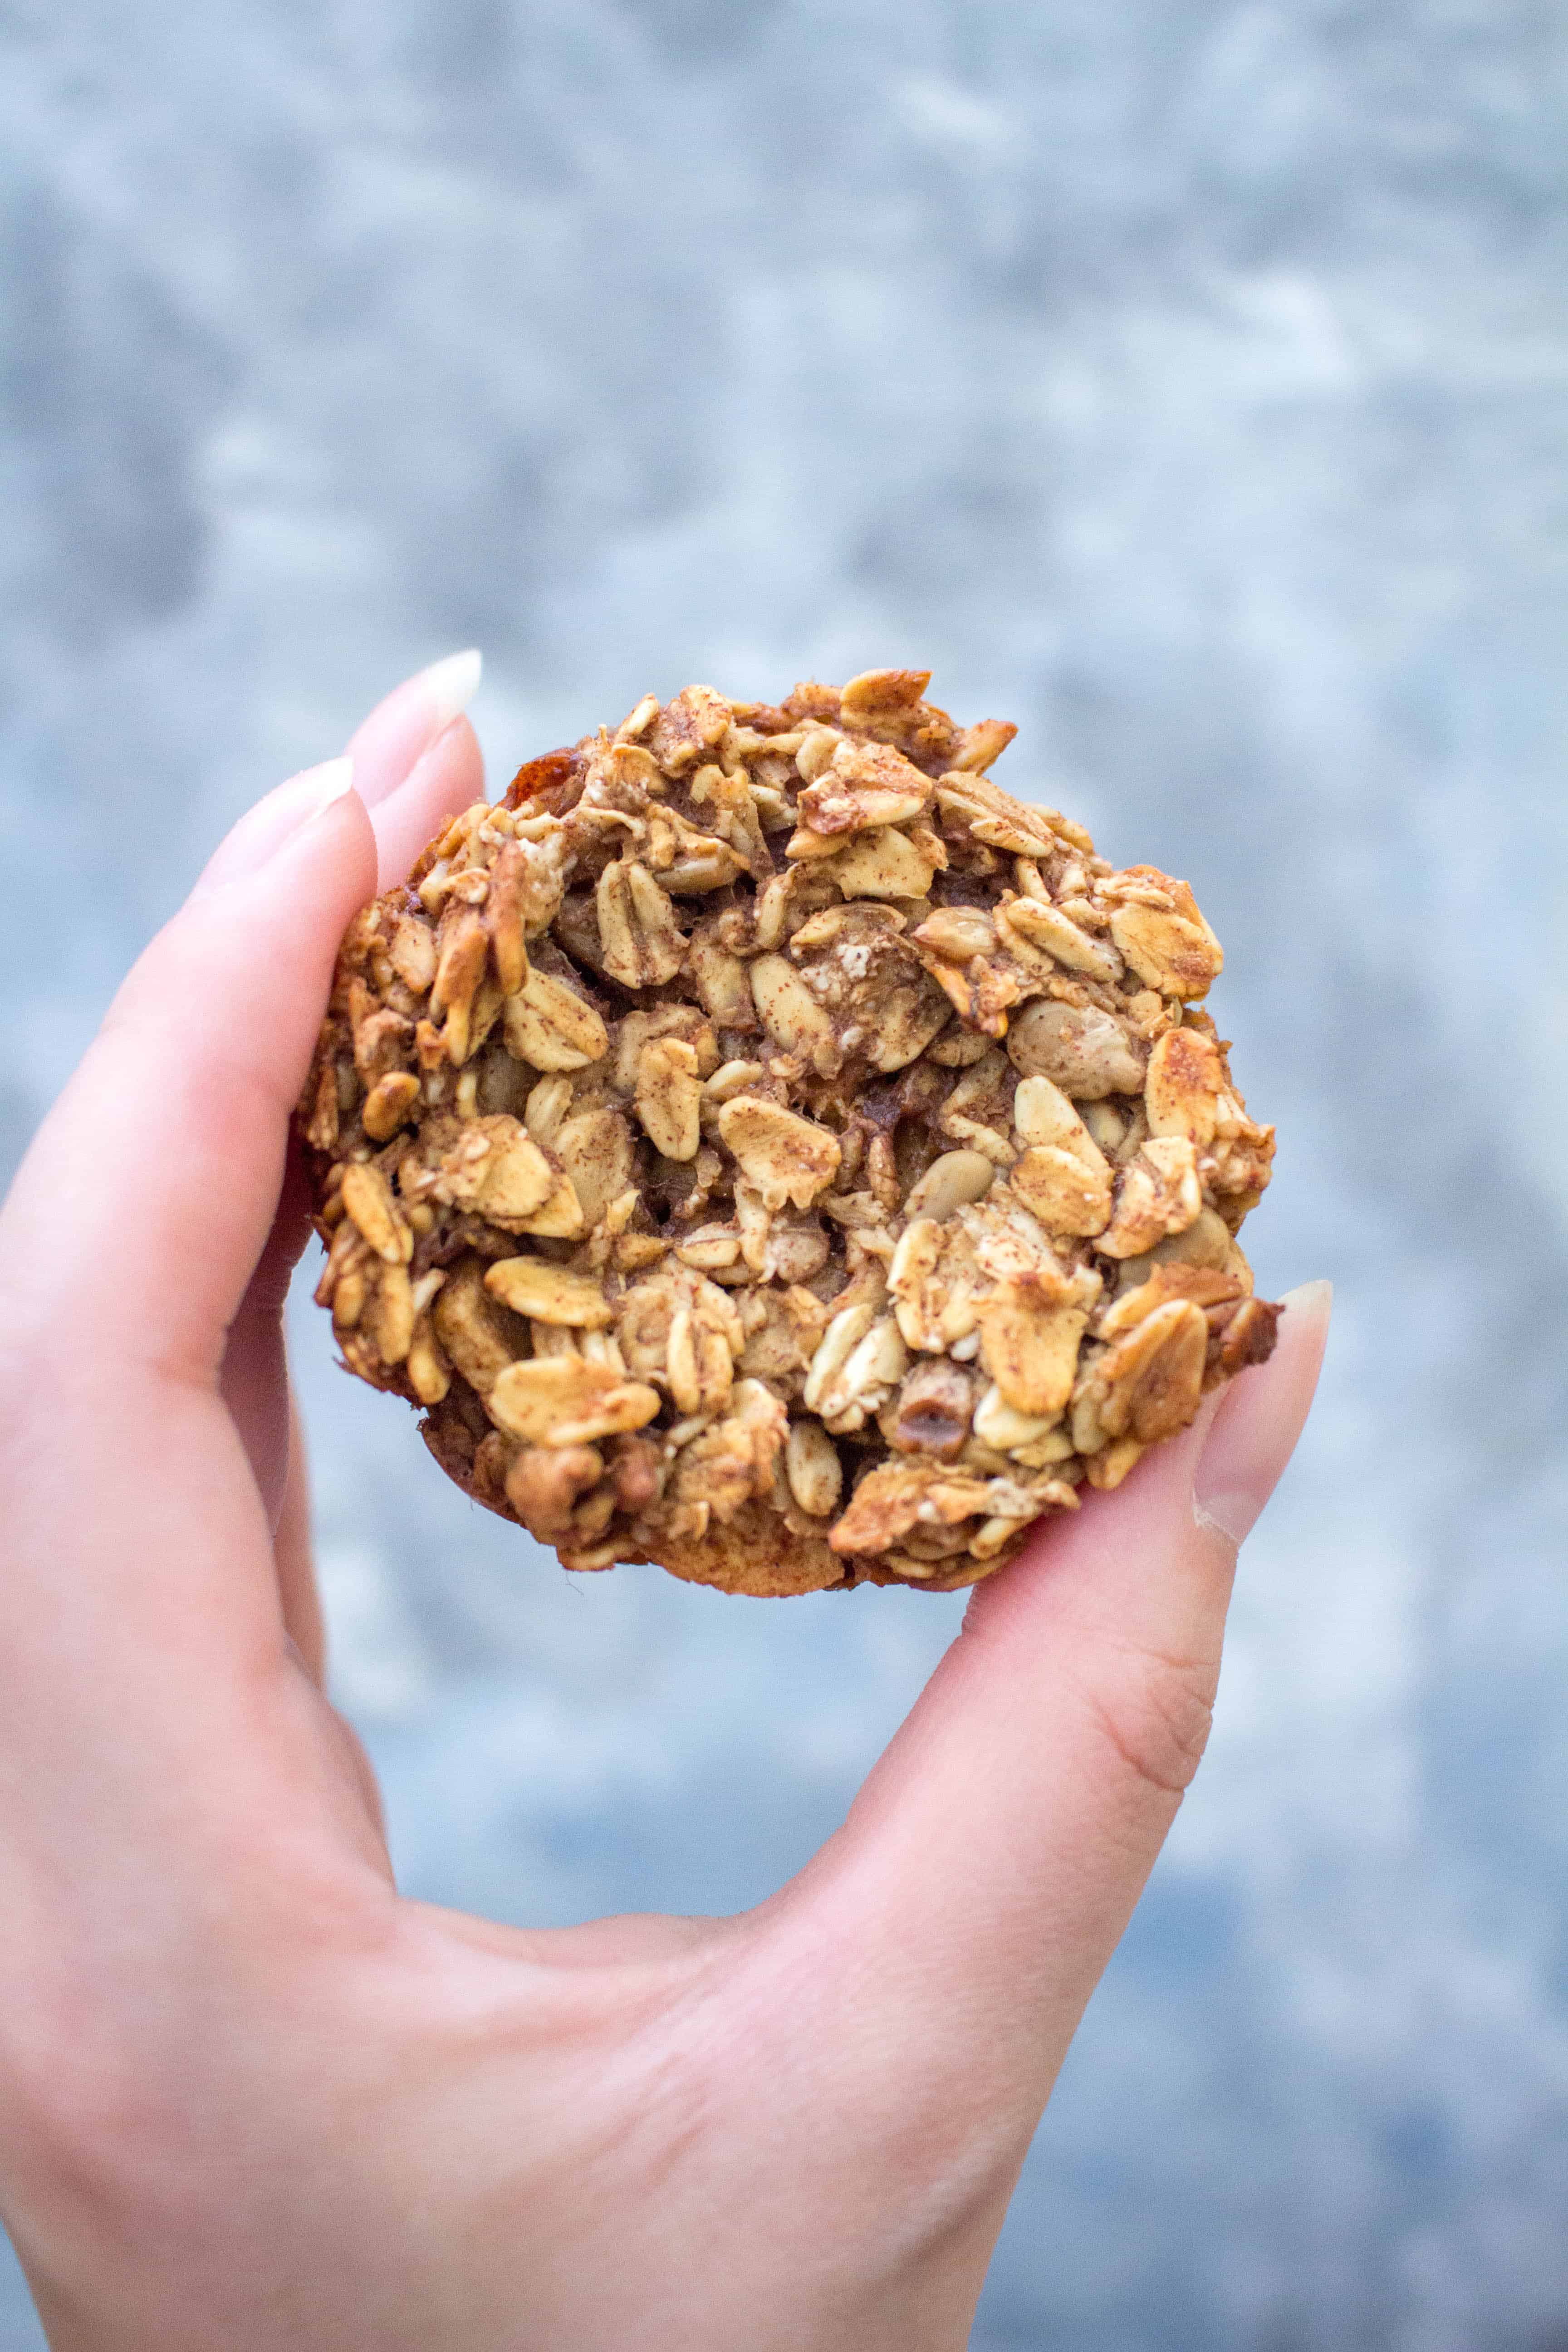 Start your morning off deliciously with these healthy baked apple oatmeal cups!